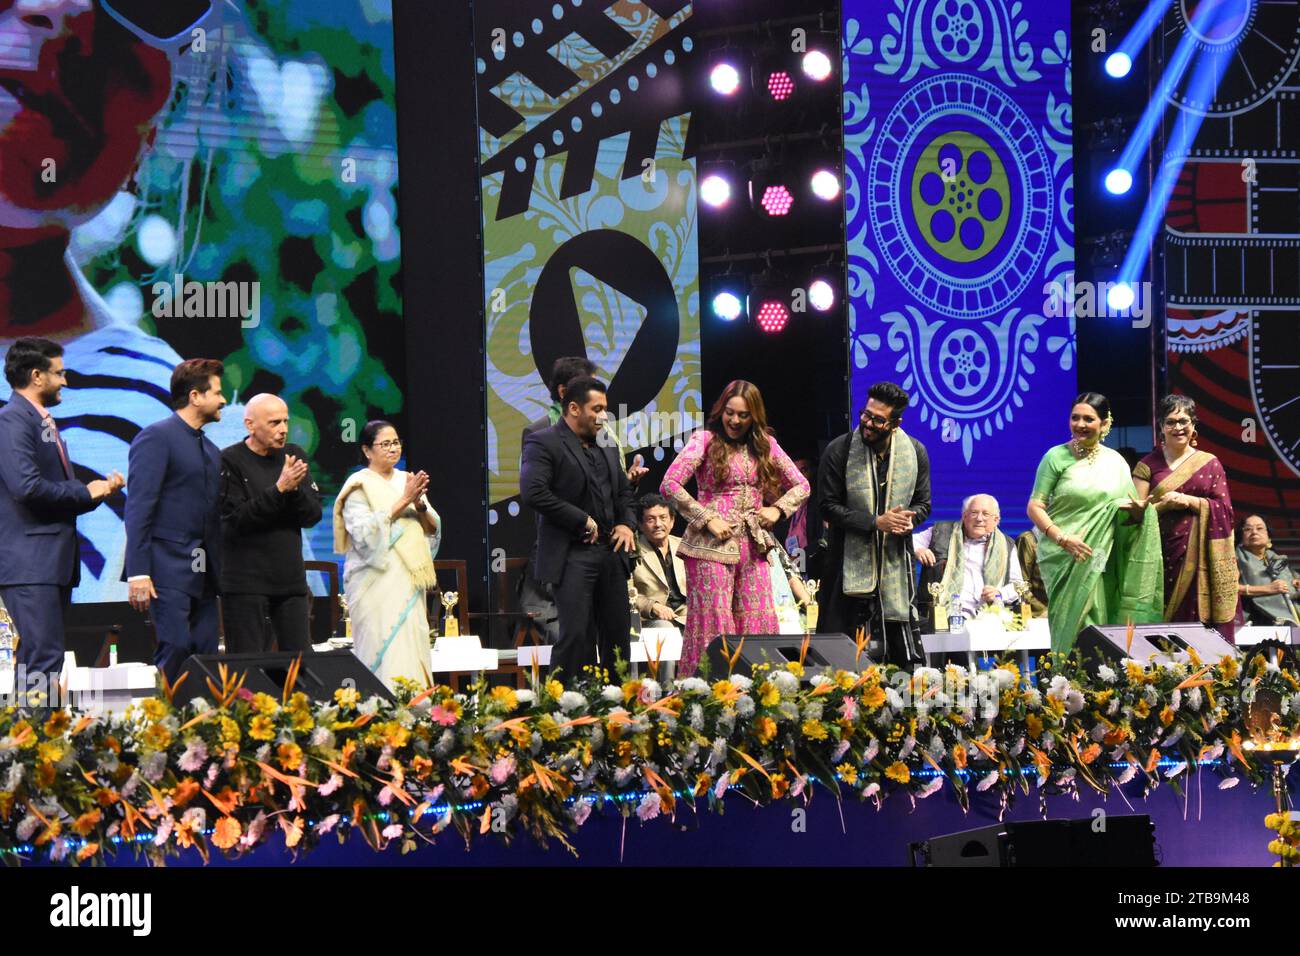 Kolkata, West Bengal, India. 5th Dec, 2023. Mamata Banerjee, Chief Minister of West Bengal, Bollywood star actor Salman Khan and other dignitaries and actors dancing at the inaugural function of the 29th edition of the Kolkata International Film Festival (KIFF 29), organized by the Information and Cultural Affairs Department, Government of West Bengal, which is scheduled to be held between 5 - 12 December, 2023 in Kolkata, the cultural capital of the State of West Bengal. this festival is accredited by the International Federation of Film Producers' Association or FIAPF. (Credit Image: © Bi Stock Photo